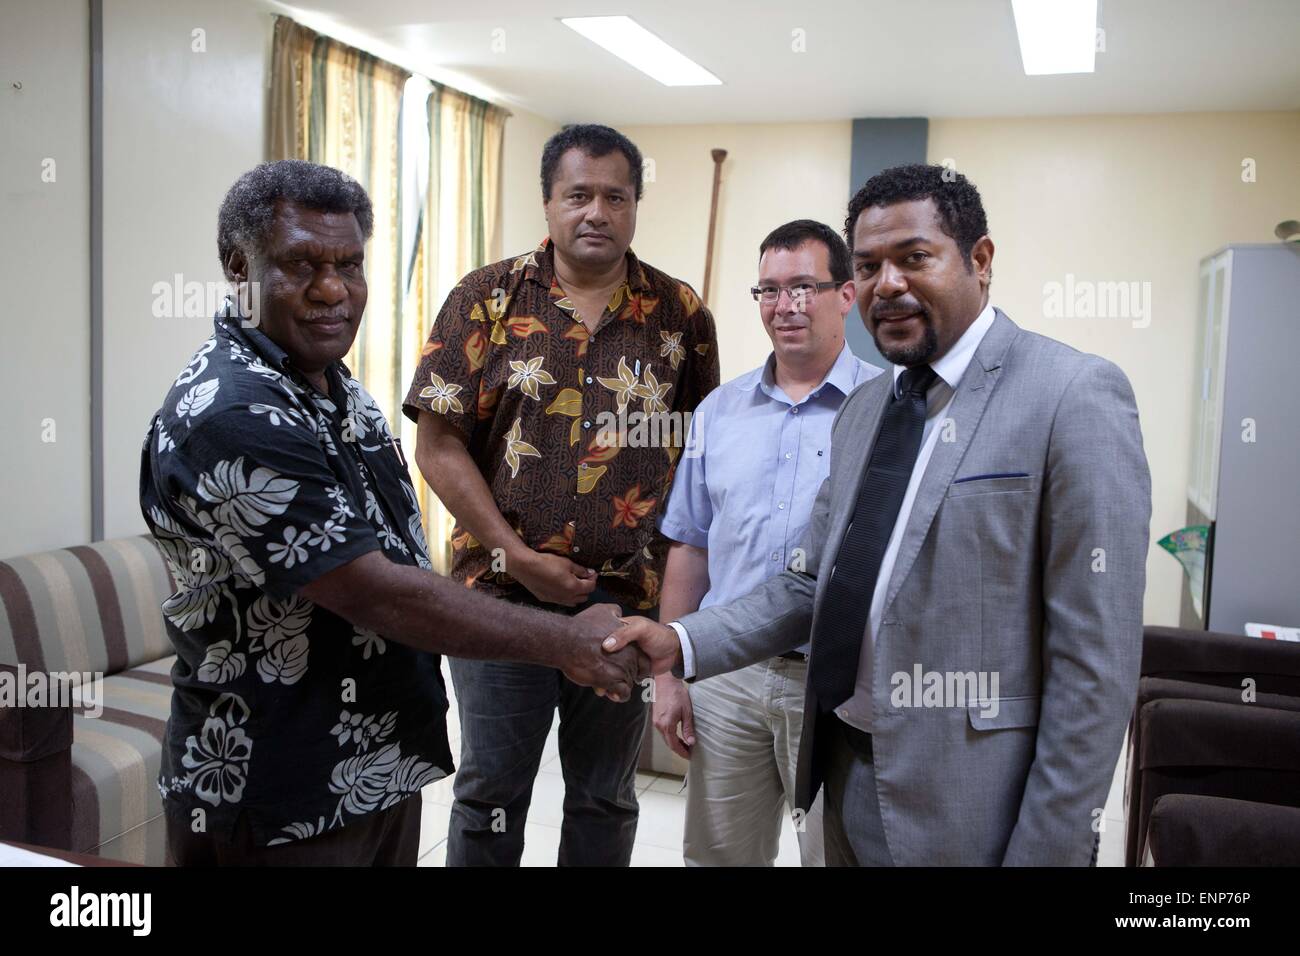 Vanuatu, Port Vila, the capital, 2 months after PAM cyclone, aftermath, (left) Vanuatu Minister of Climate Change James Bule, signes the declaration of Lifou, Louis Win-Nemo, Nicolas Imbert, Director of Green Cross France,    Anthony Lecren Minister of Environment of New Caledonia Stock Photo